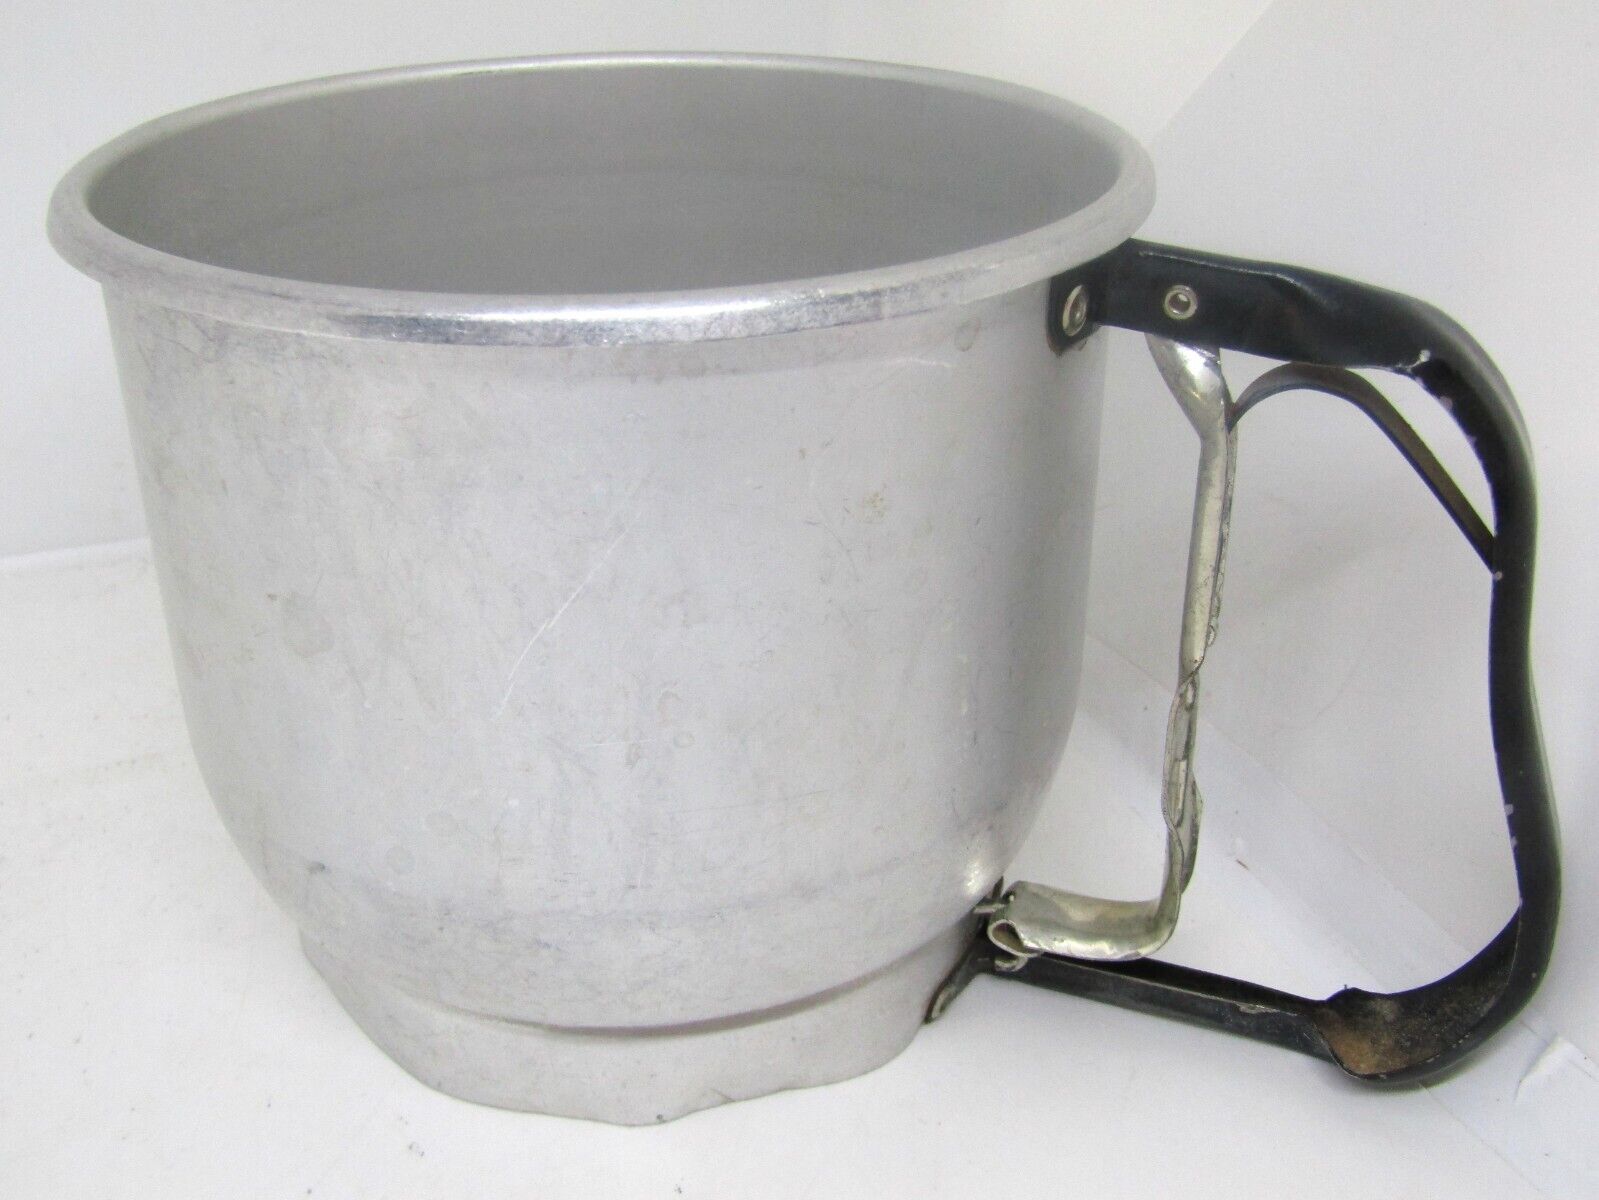 Vintage Working Foley 5 Cup Aluminum Flour Sifter Made in USA